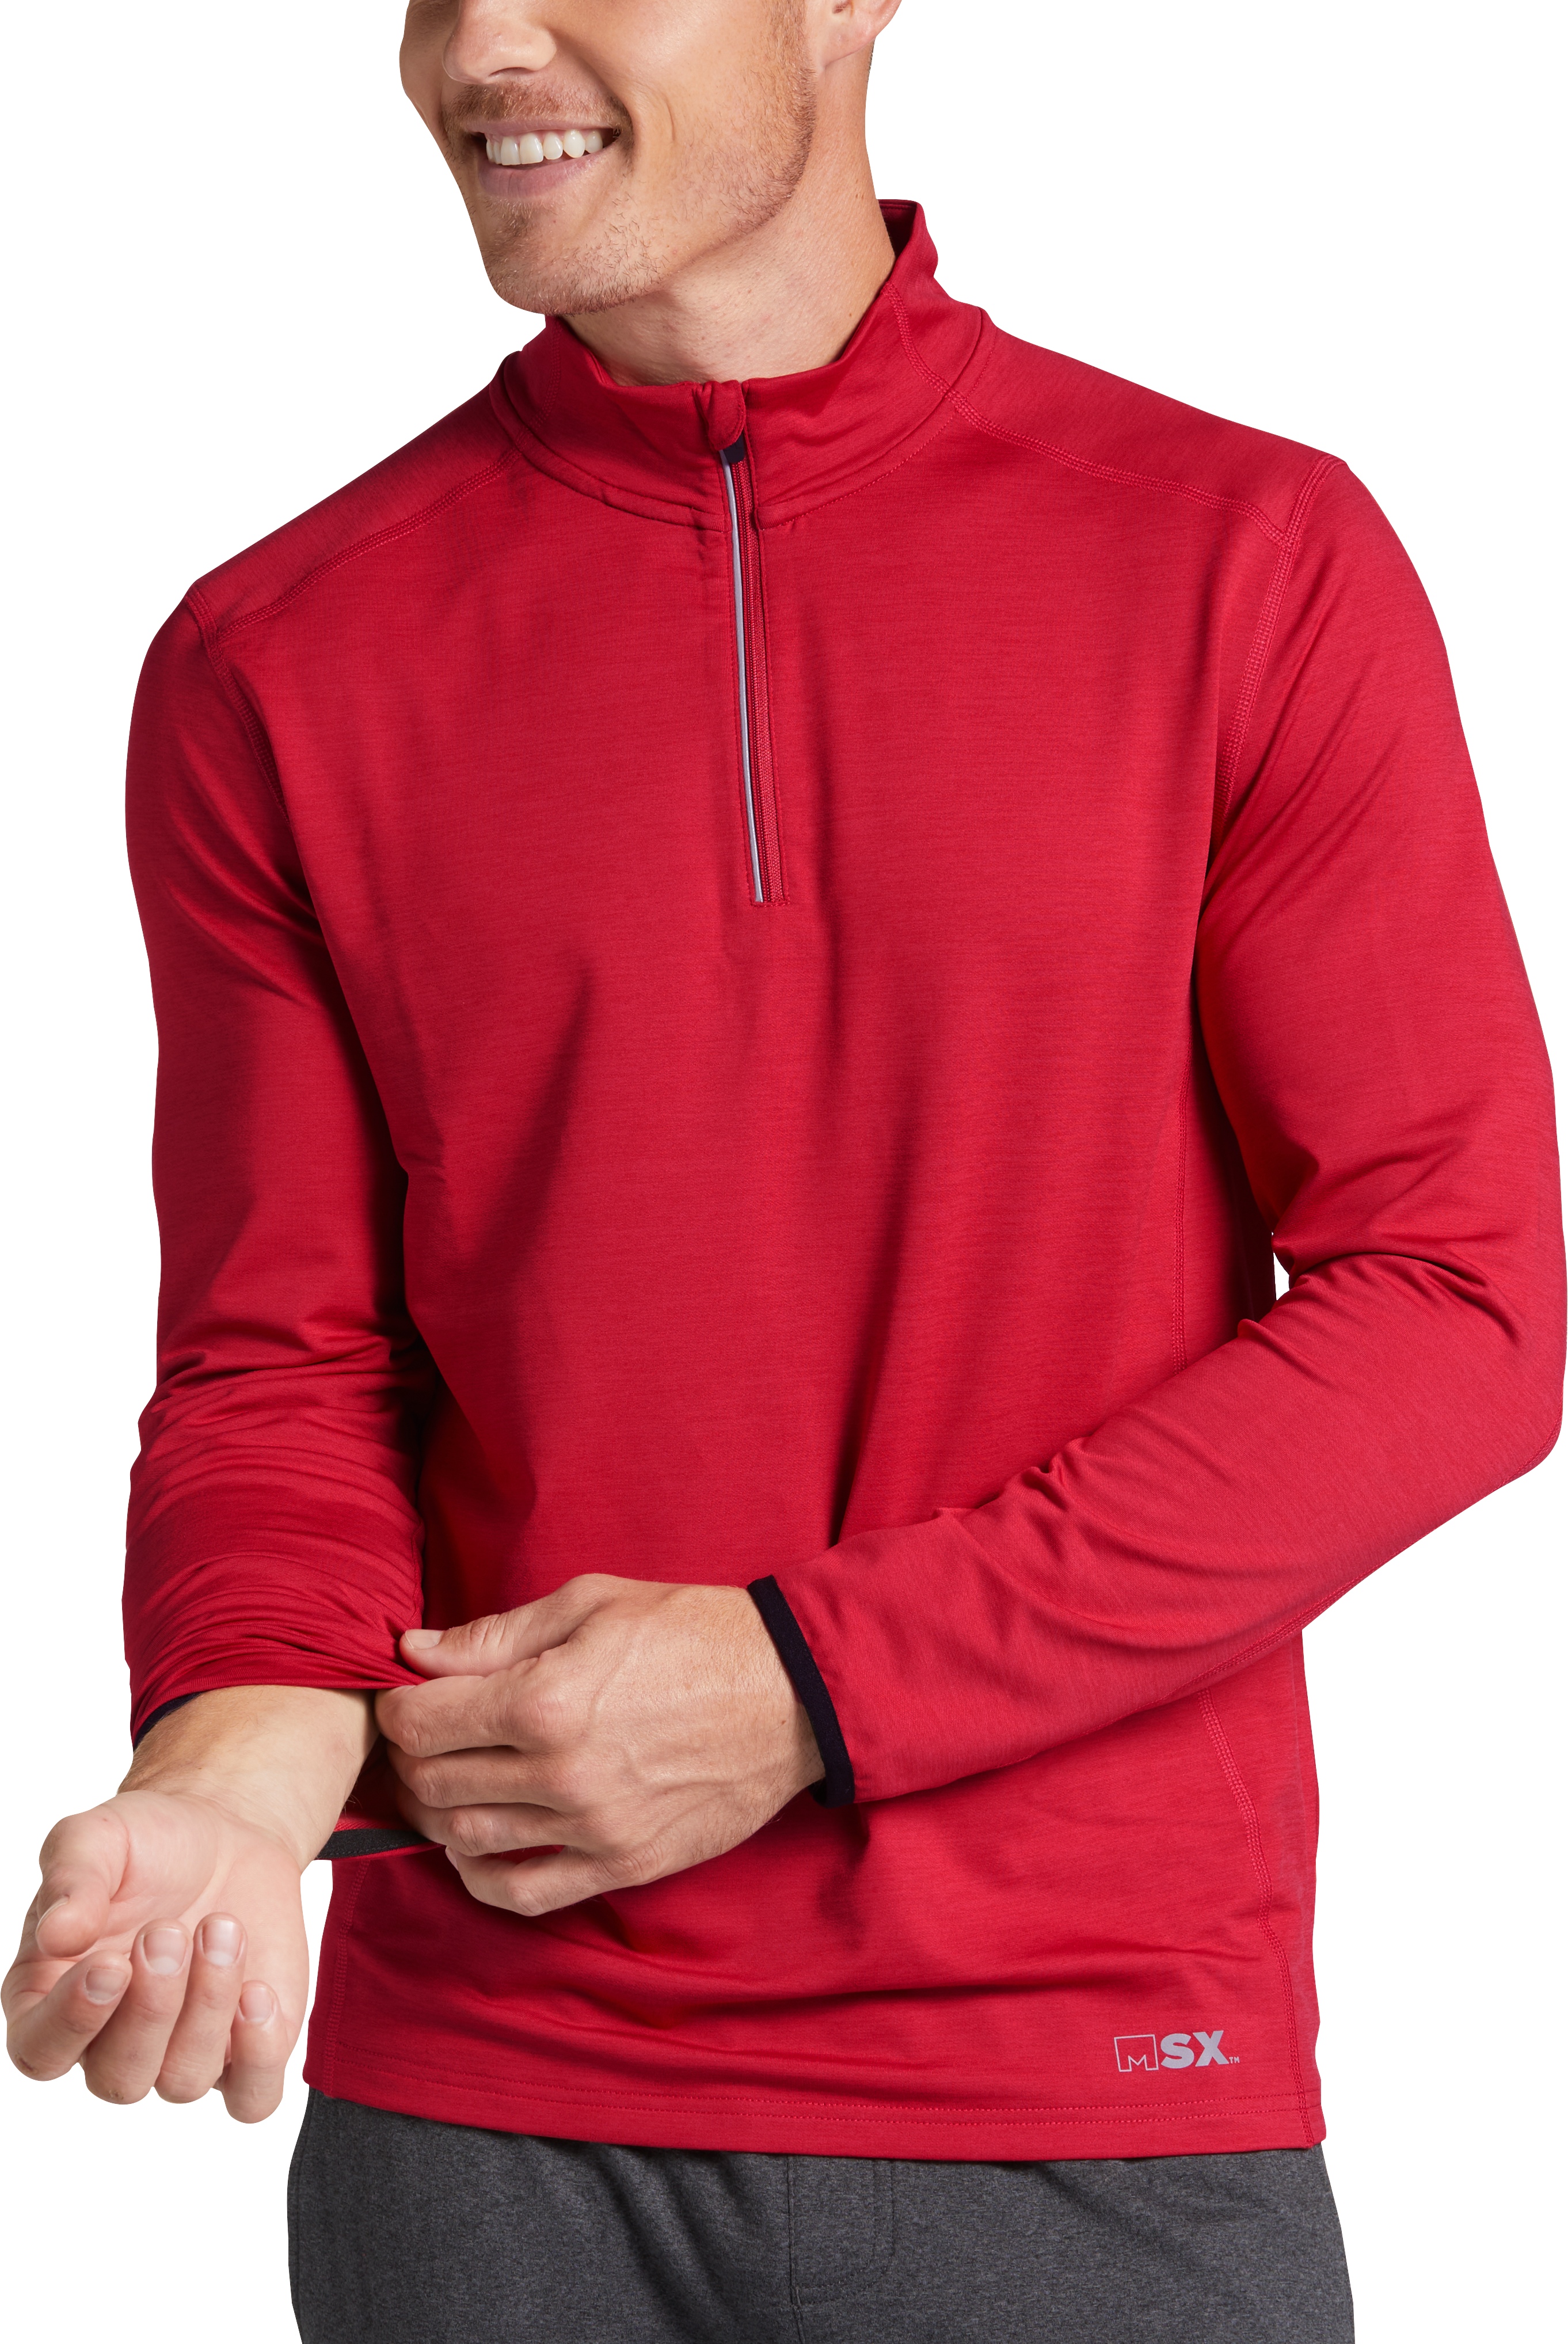 Msx By Michael Strahan Modern Fit 14 Zip Sweater Red Mens Sale 